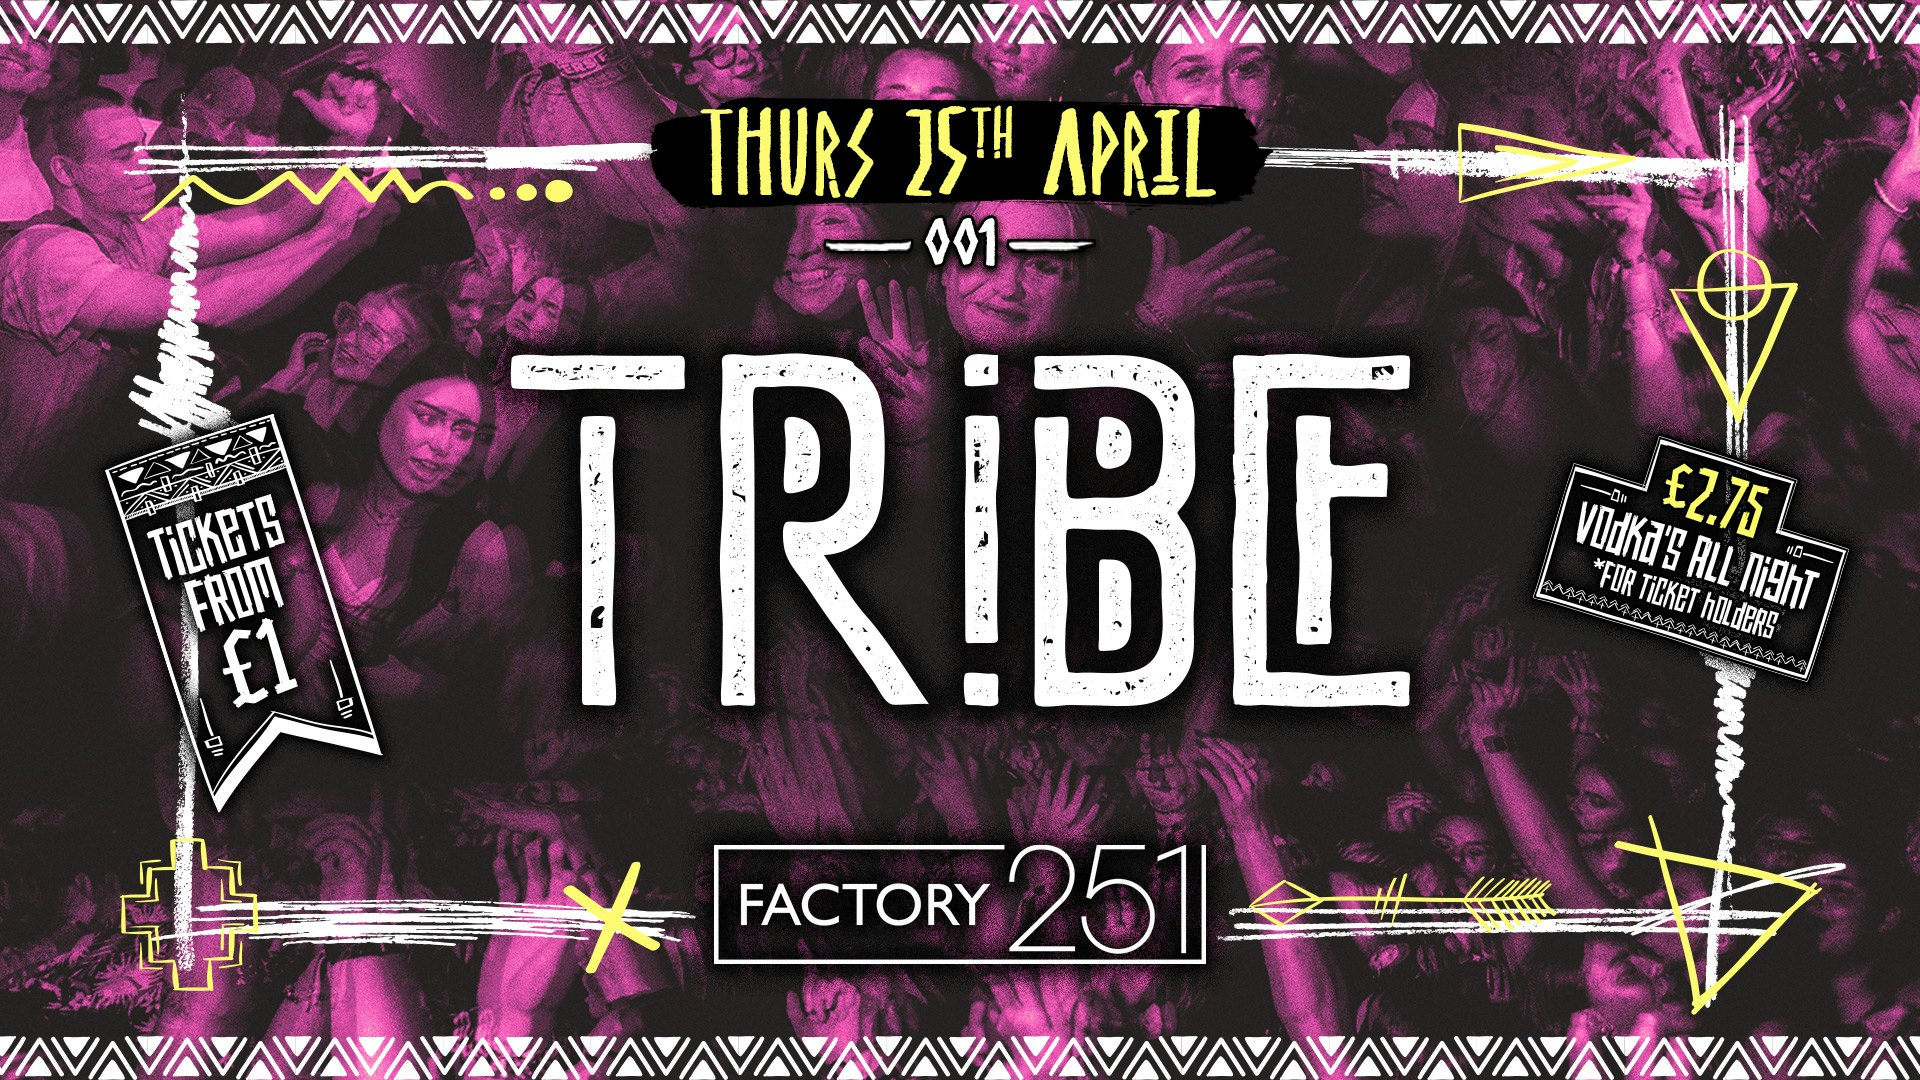 TRIBE 🌴 @ FACTORY | THURSDAY LAUNCH #001 | INTRODUCING ‘THE BOILER ROOM’ 🎶 £2.75 Vodka’s All Night for Ticket Holders |